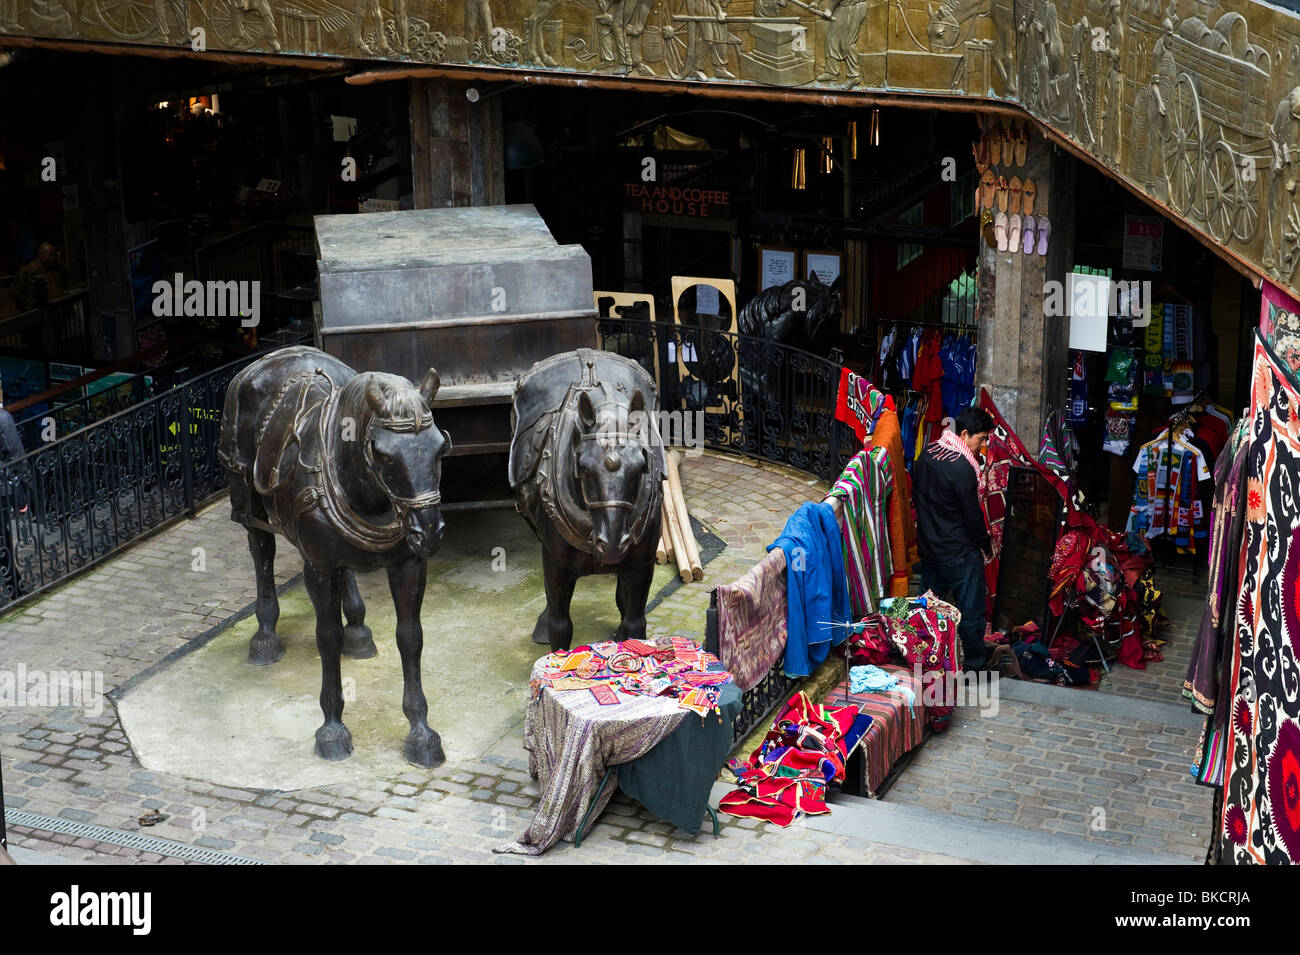 A view of the Horse Hospital Stables Market with a Horse statue part of Camden Market North London UK Stock Photo